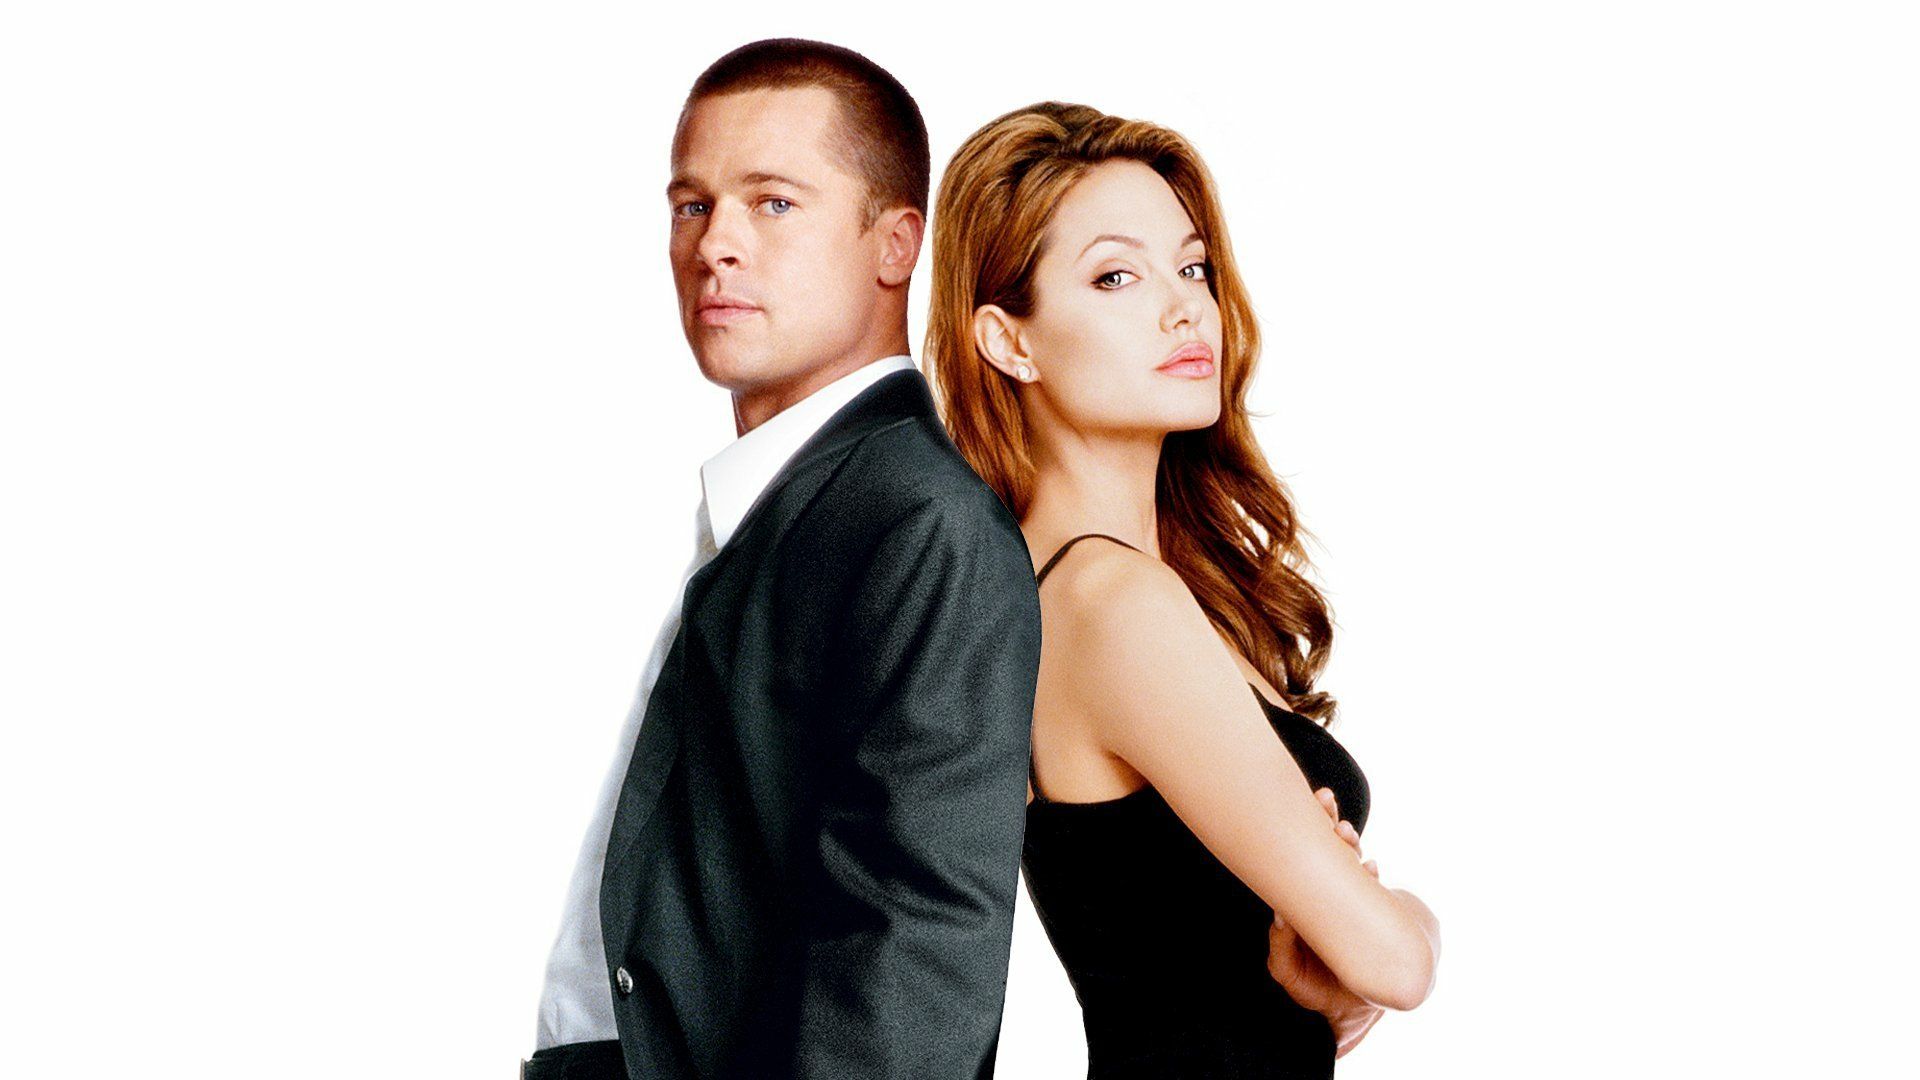 You can also upload and share your favorite Mr. & Mrs. Smith wallpapers...